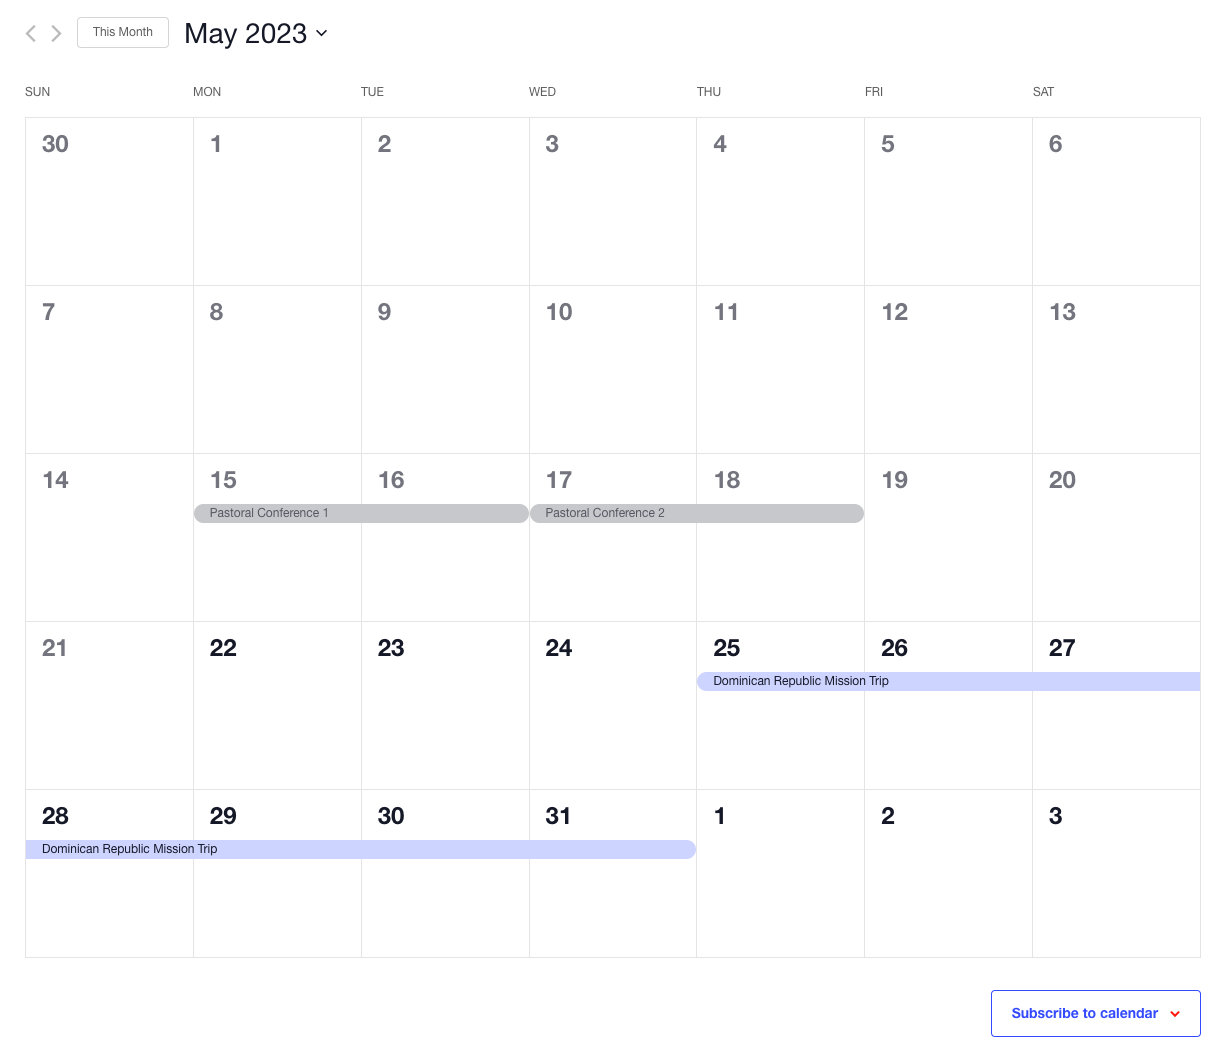 A month view of the calendar using the multi-day event feature